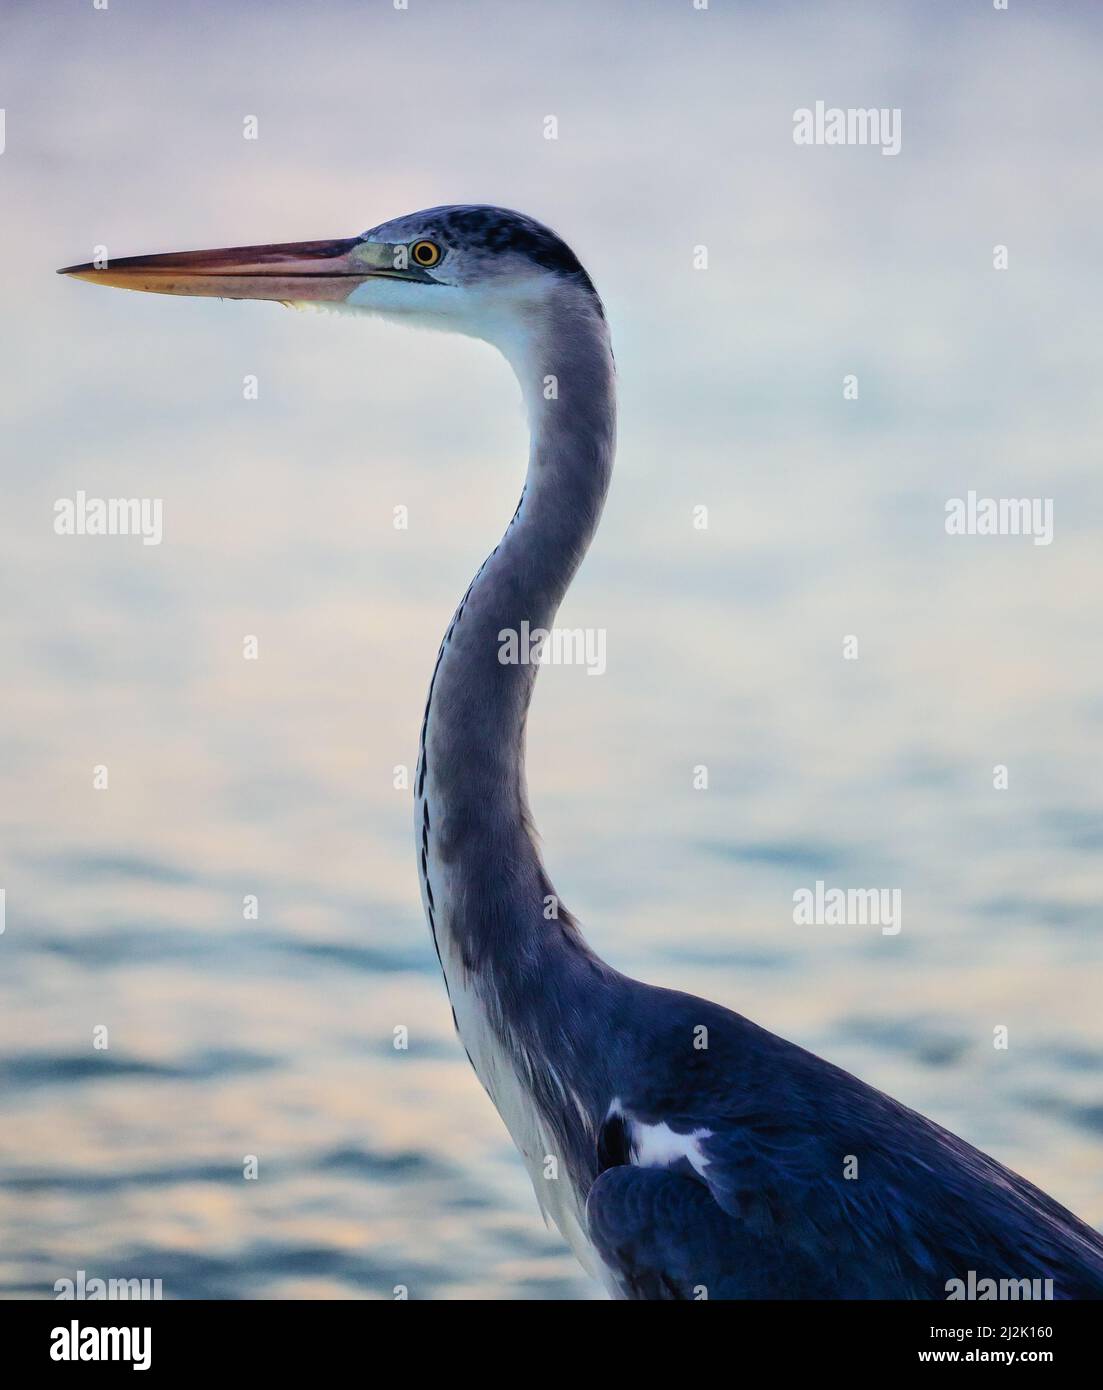 Portrait of a Blue Heron standing by the ocean, Maldives Stock Photo